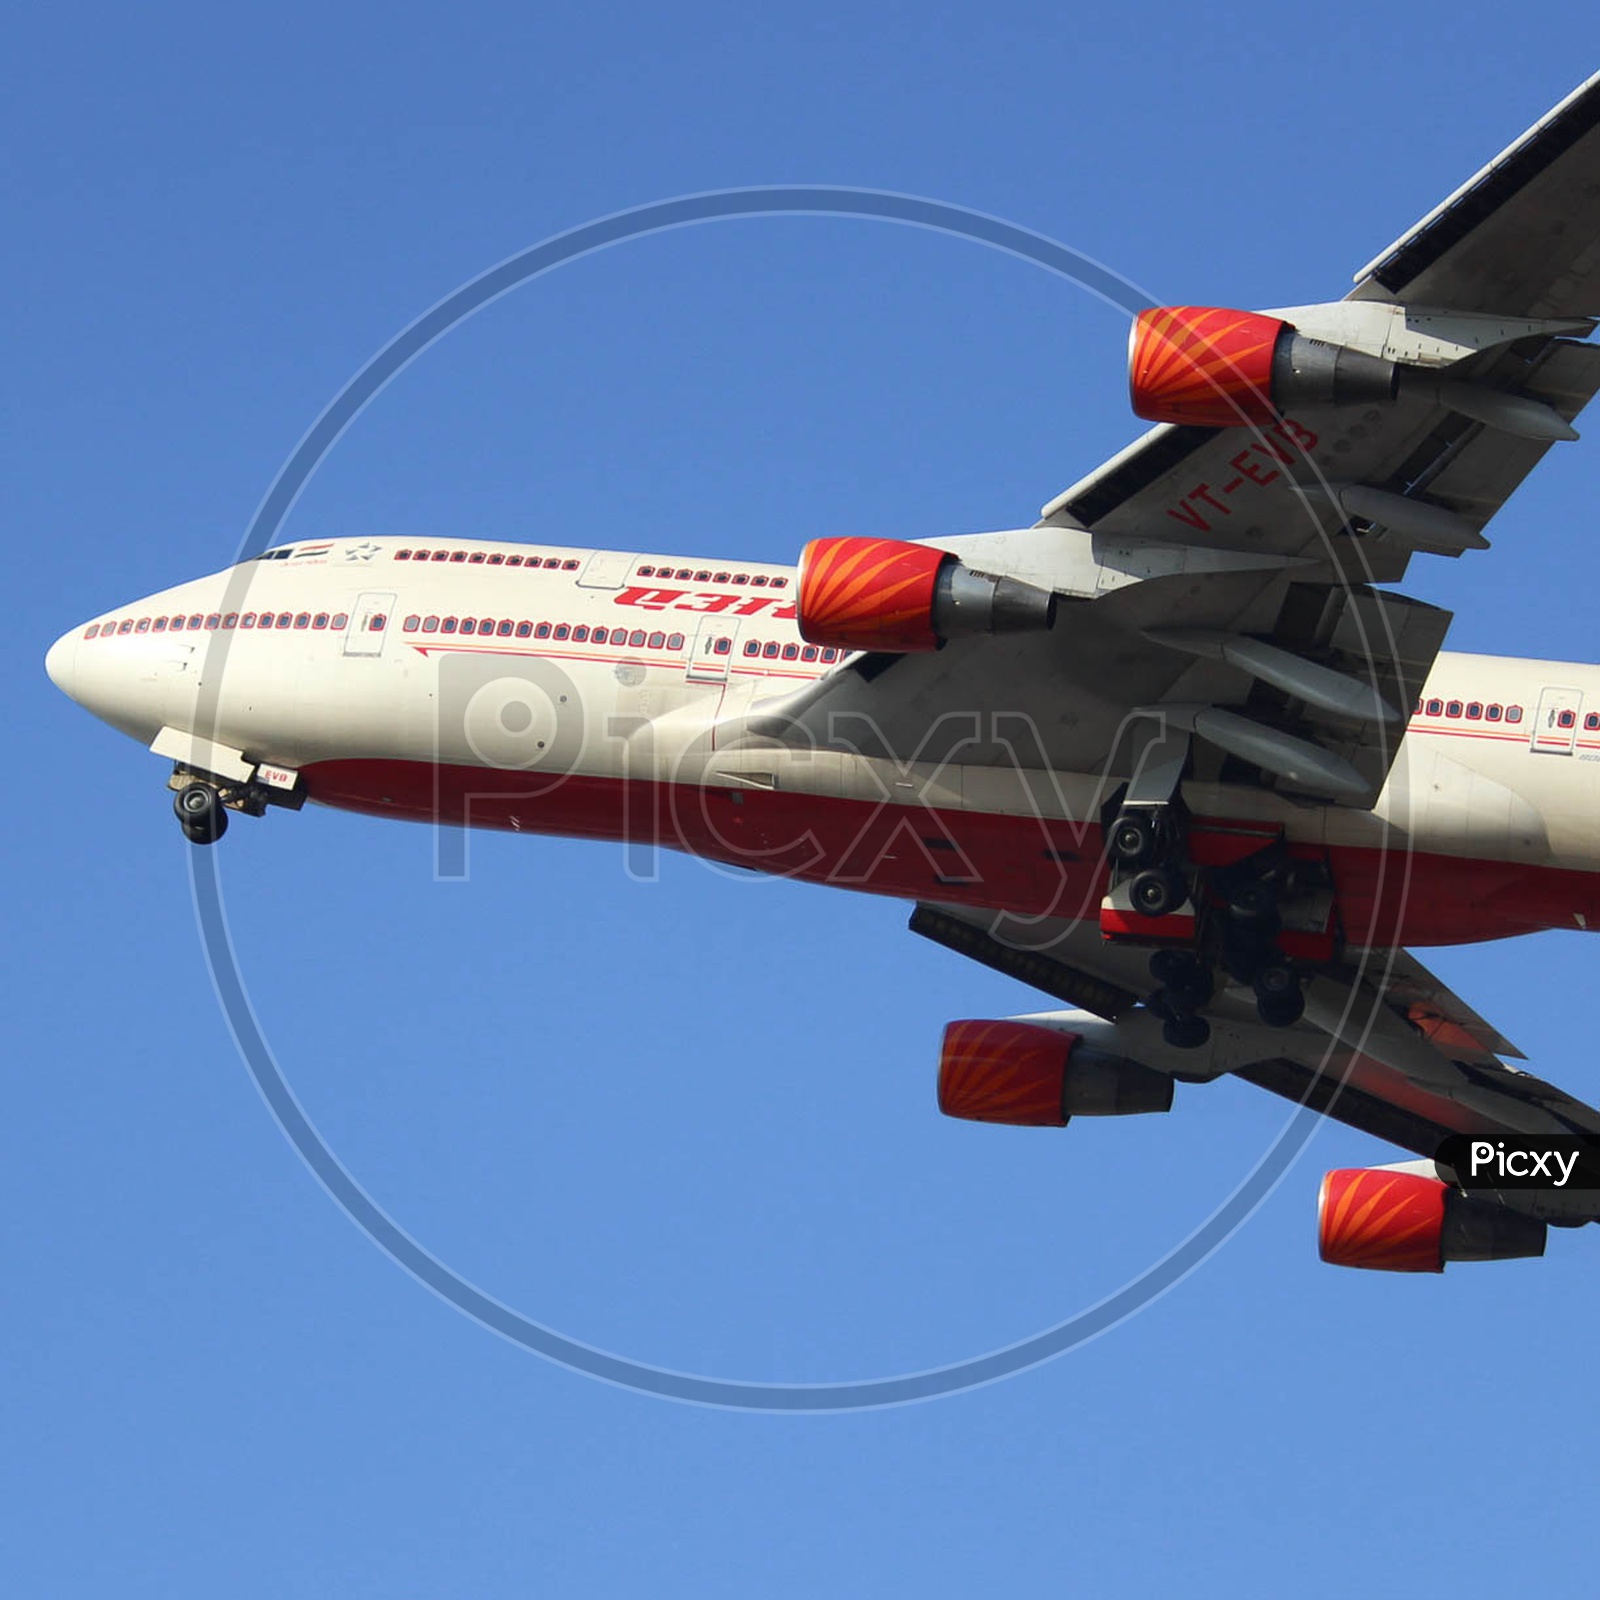 Air India B747 taking off for its fight to hyderabad.